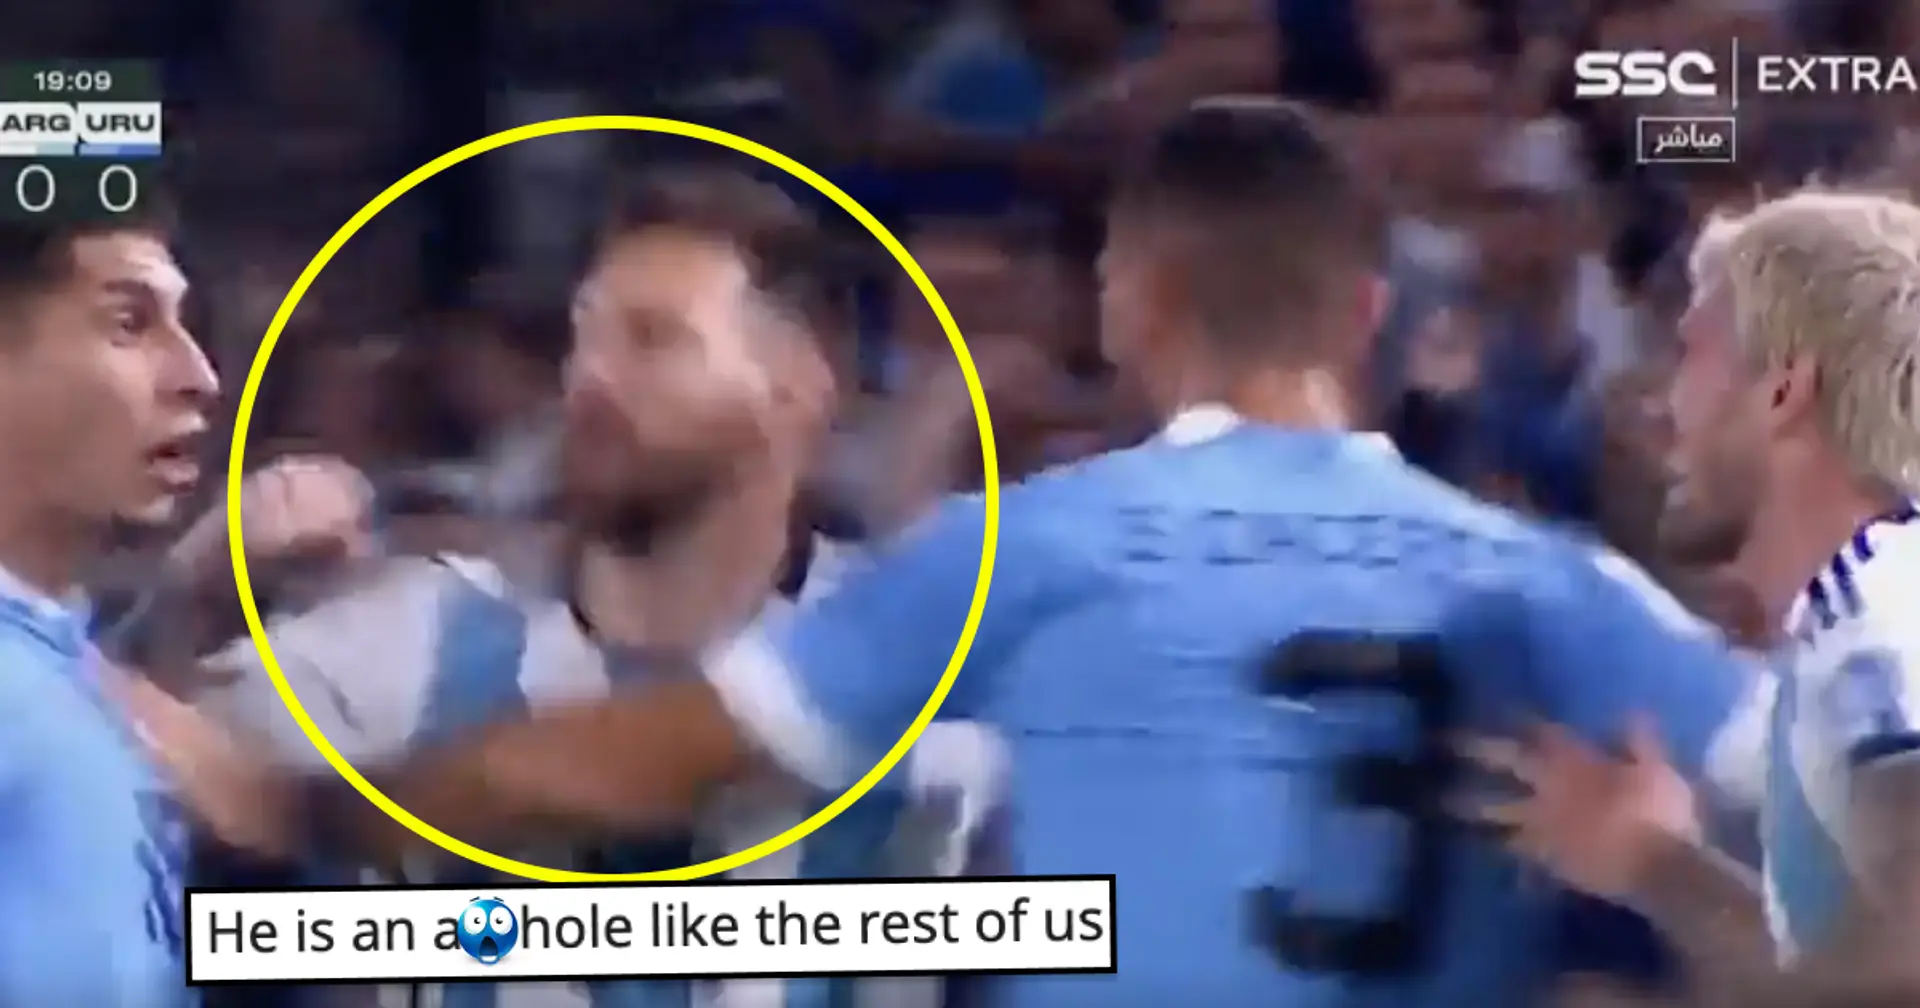 'You know it's serious when he does it': One thing Messi did during Argentina-Uruguay brawl